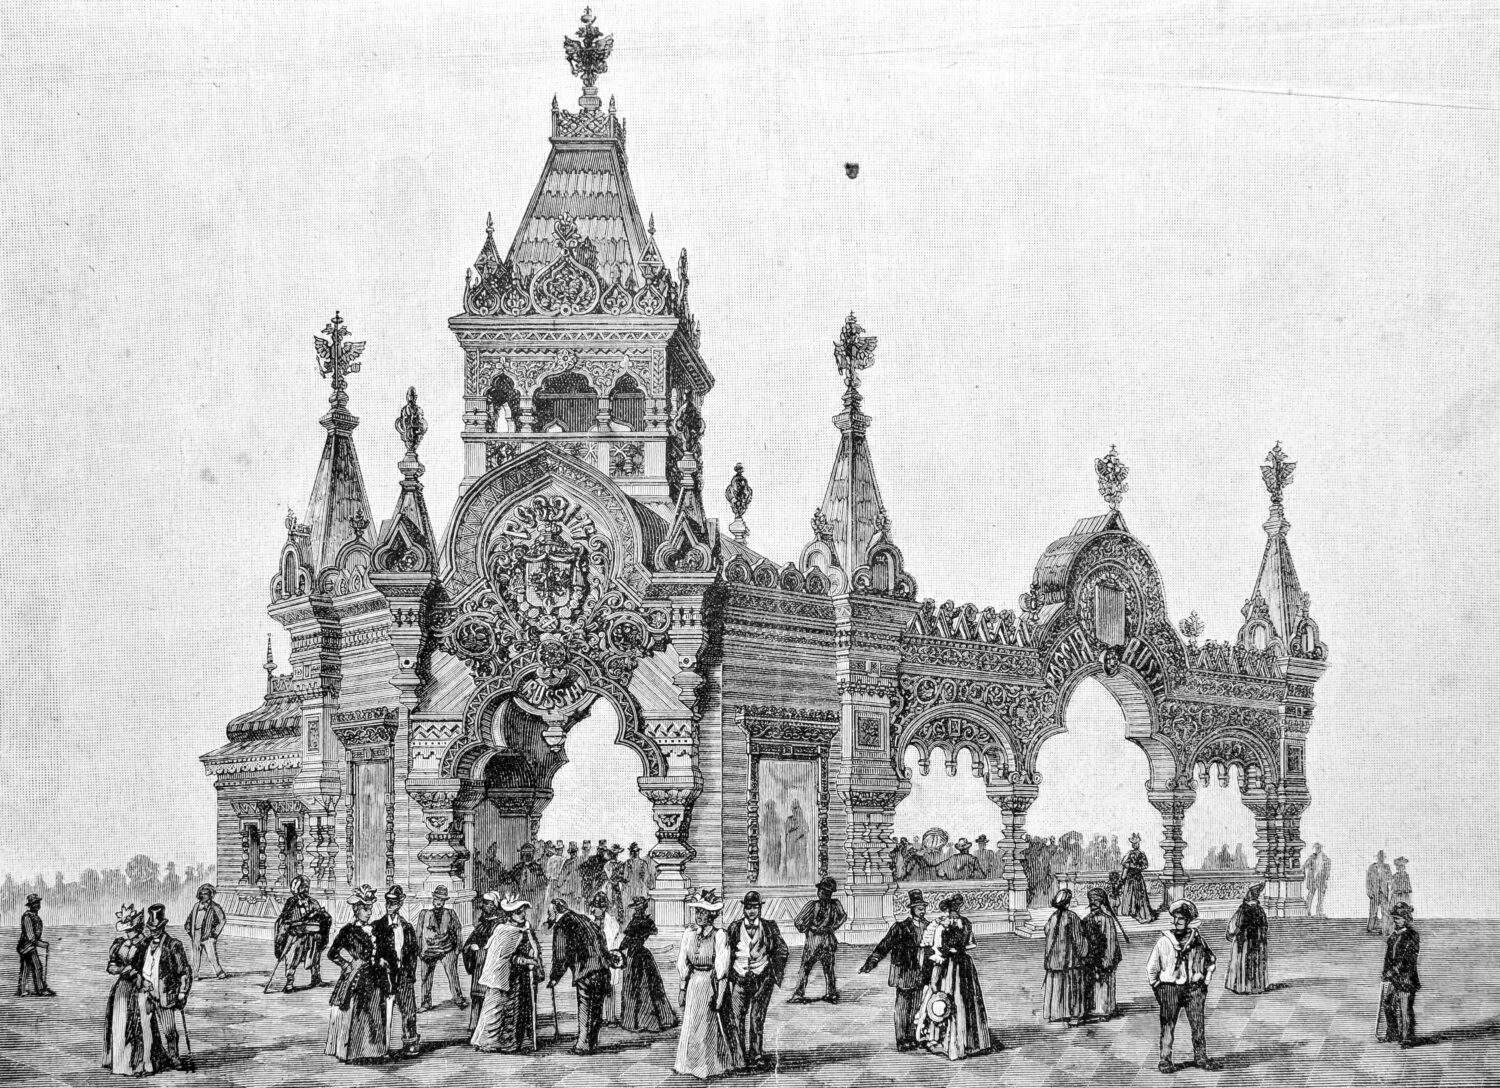 World's Columbian exhibition in Chicago. Engraving by Rashevsky from picture by painter Grigoriev. Published in magazine "Niva", publishing house A.F. Marx, St. Petersburg, Russia, 1893